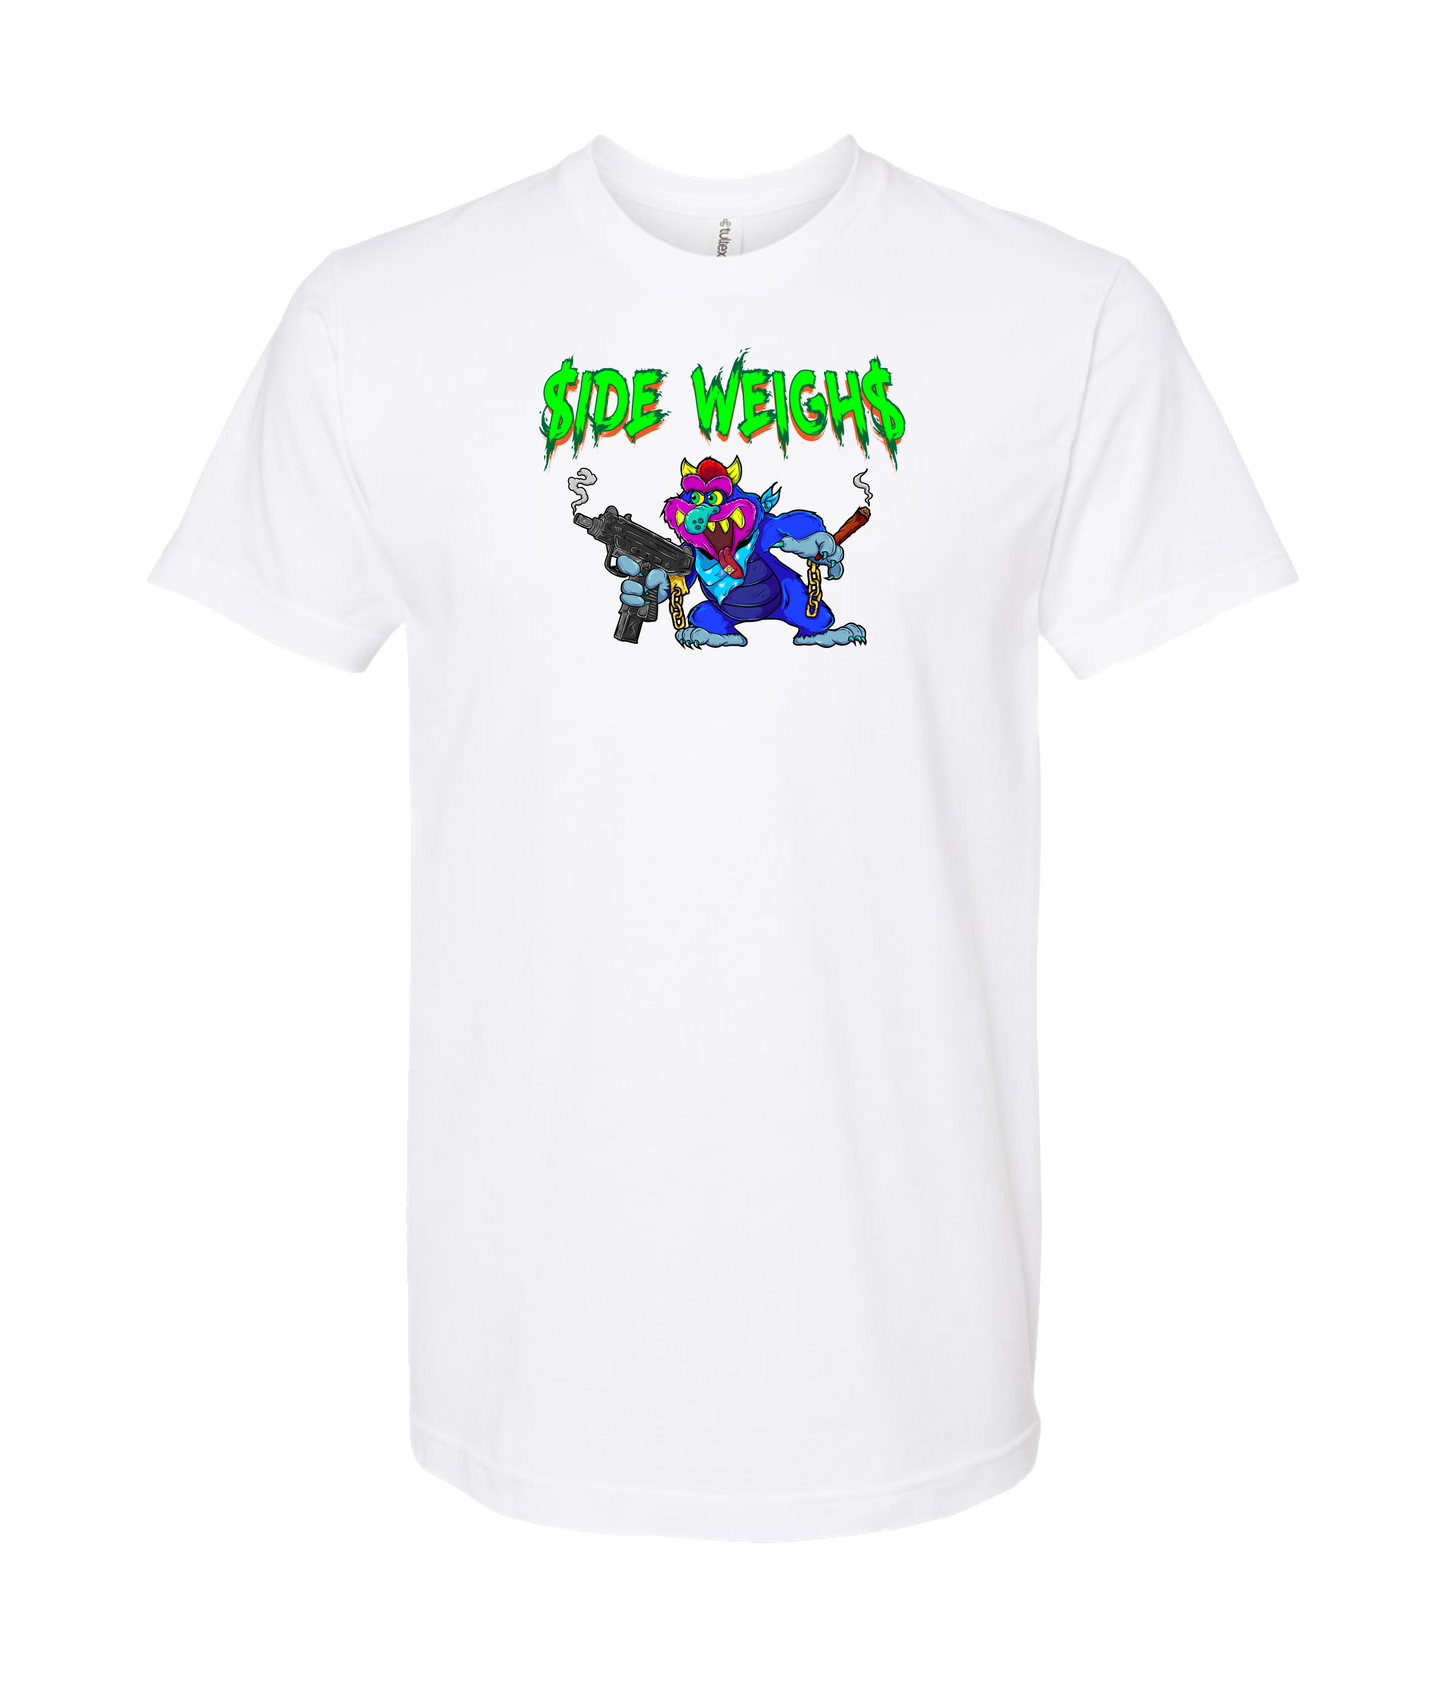 Side Weighs - Spitz - White T-Shirt